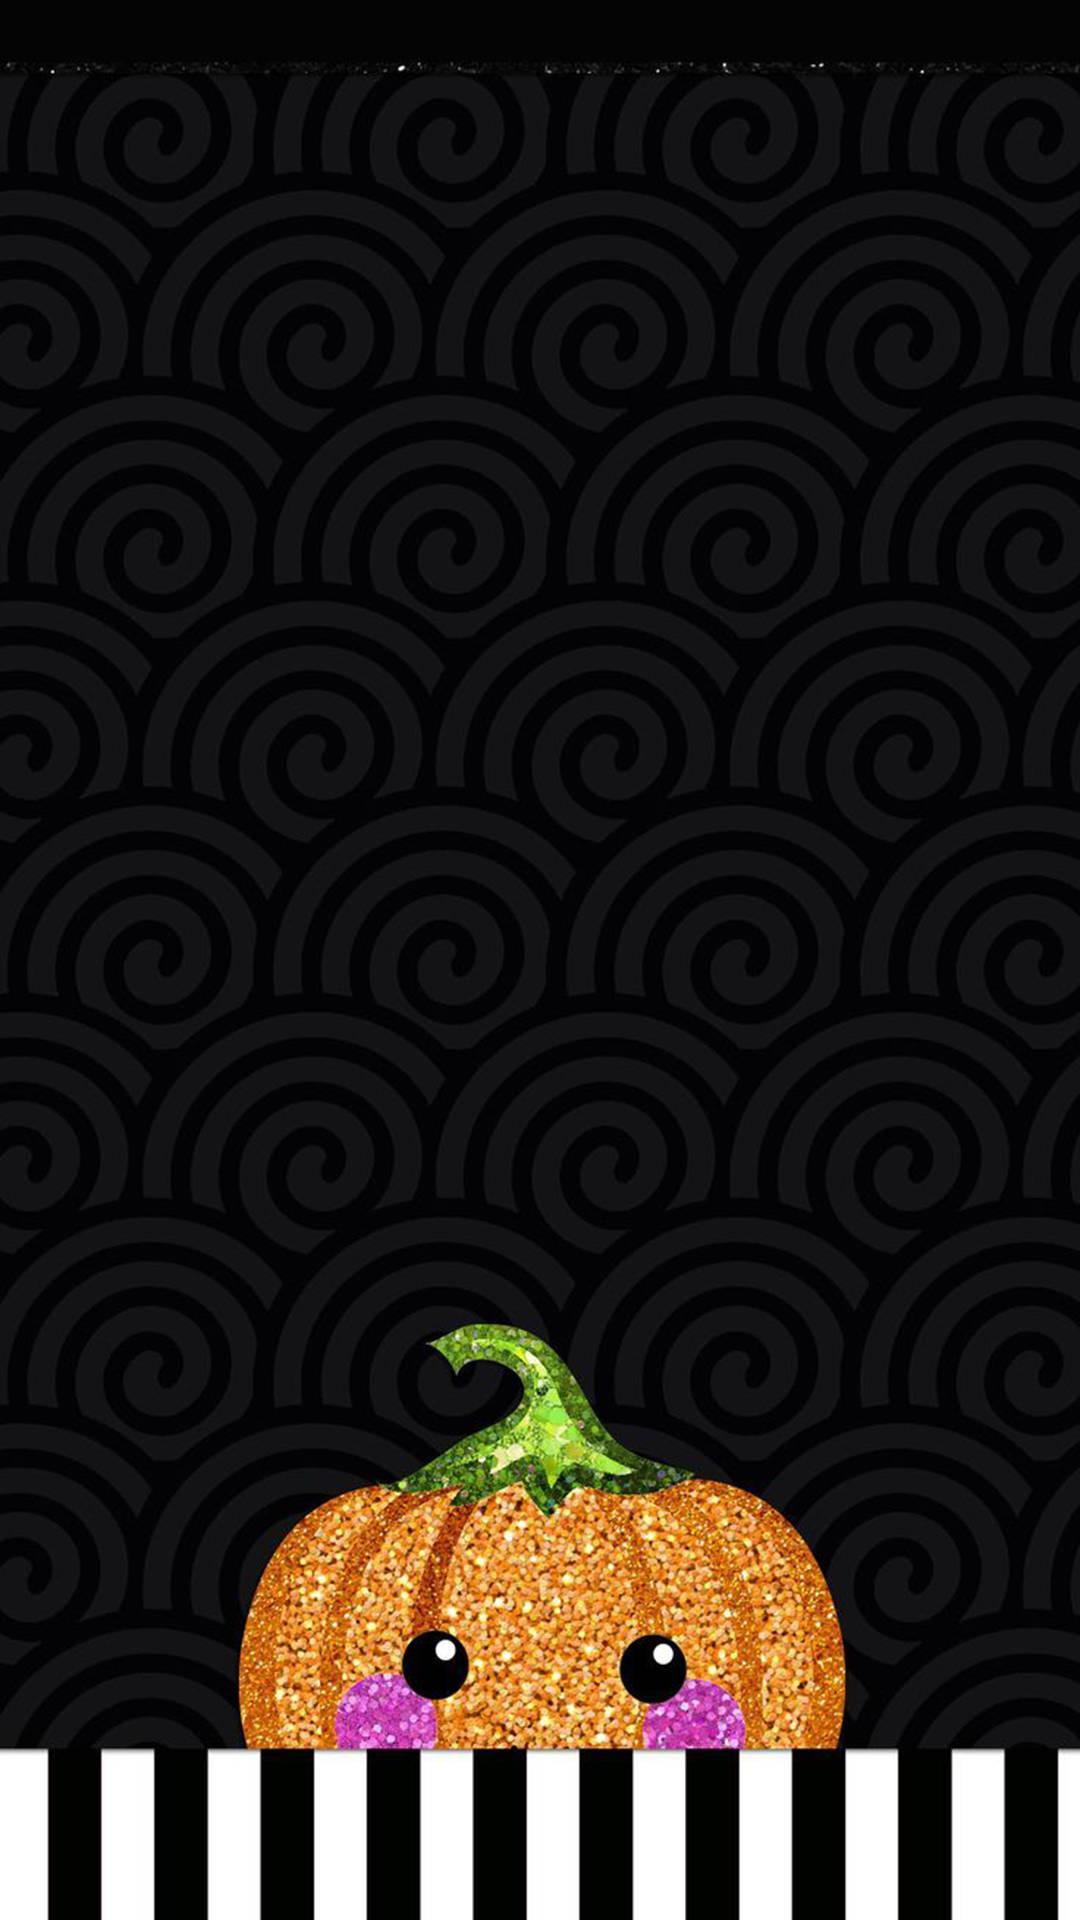 Get into the Halloween spirit with this ultra-cute phone background! Wallpaper